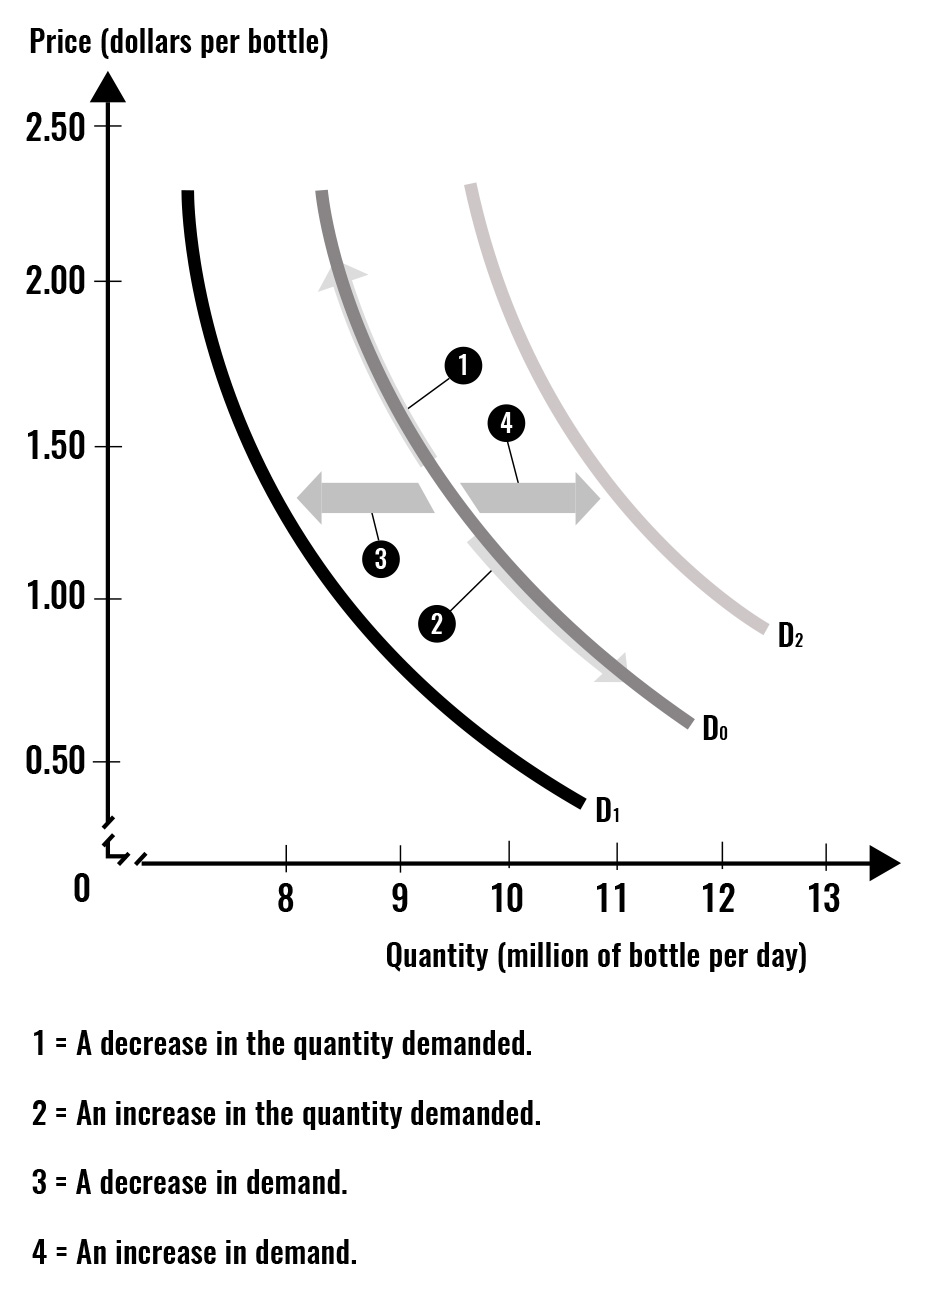 The graph summarizes demand shifters leading to an increase or decrease in demand. In addition, it emphasizes that what causes a movement along the demand curve is the change in the own price of the good or service.